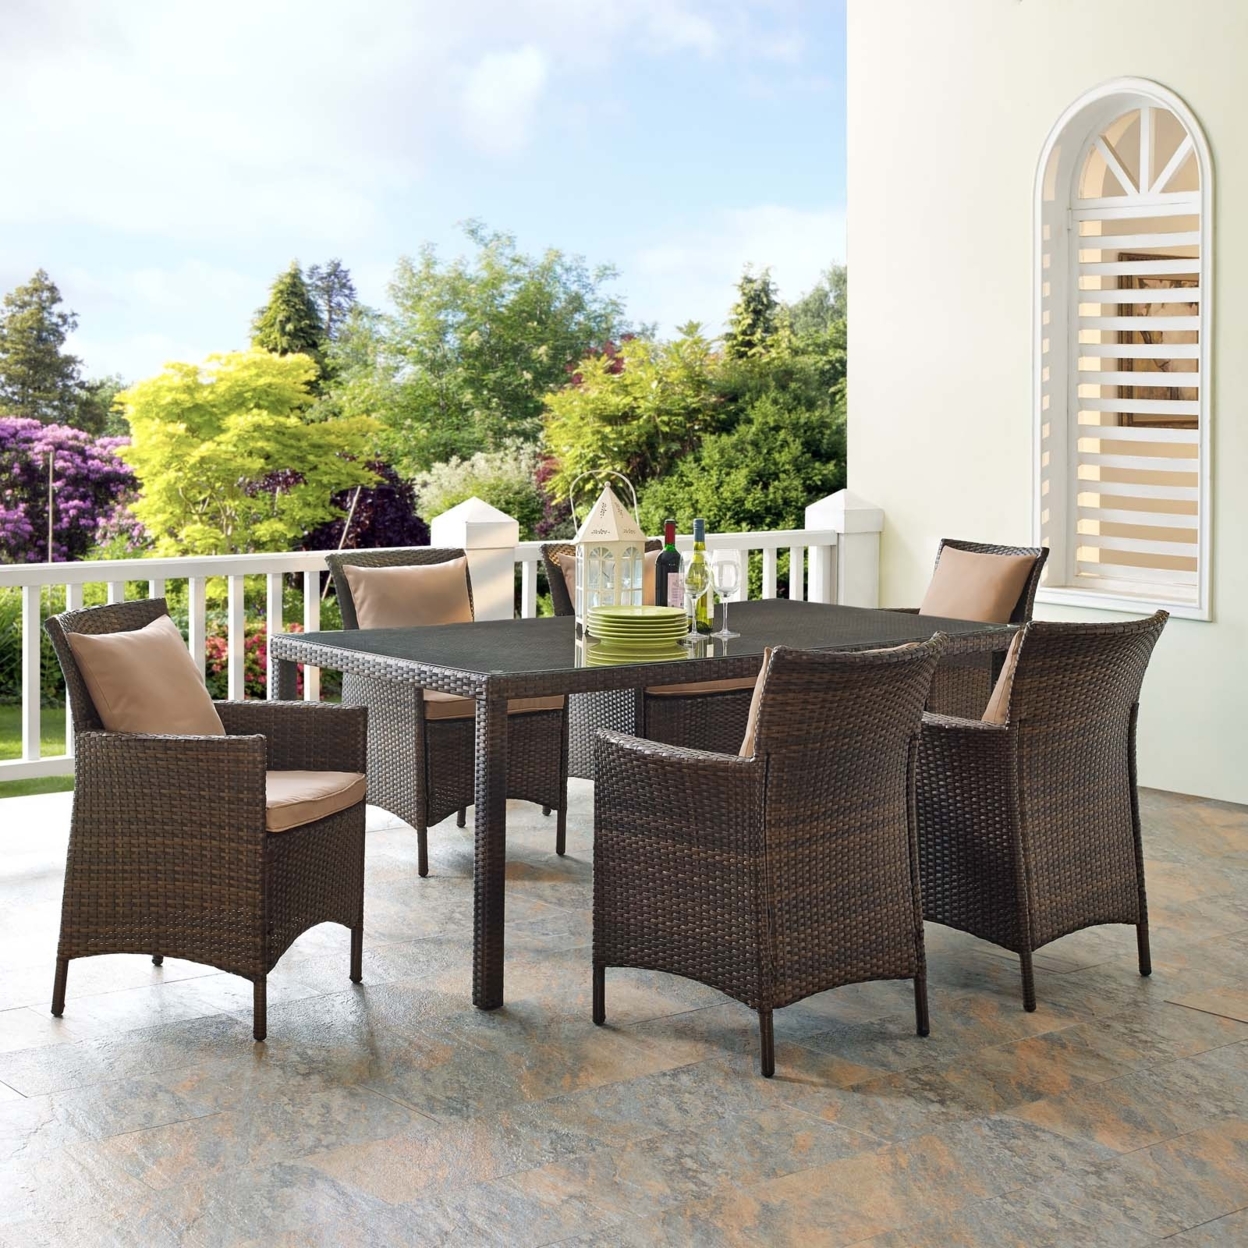 Modway Conduit 7-Piece Modern Rattan Outdoor Dining Set in Brown/Mocha - image 1 of 5